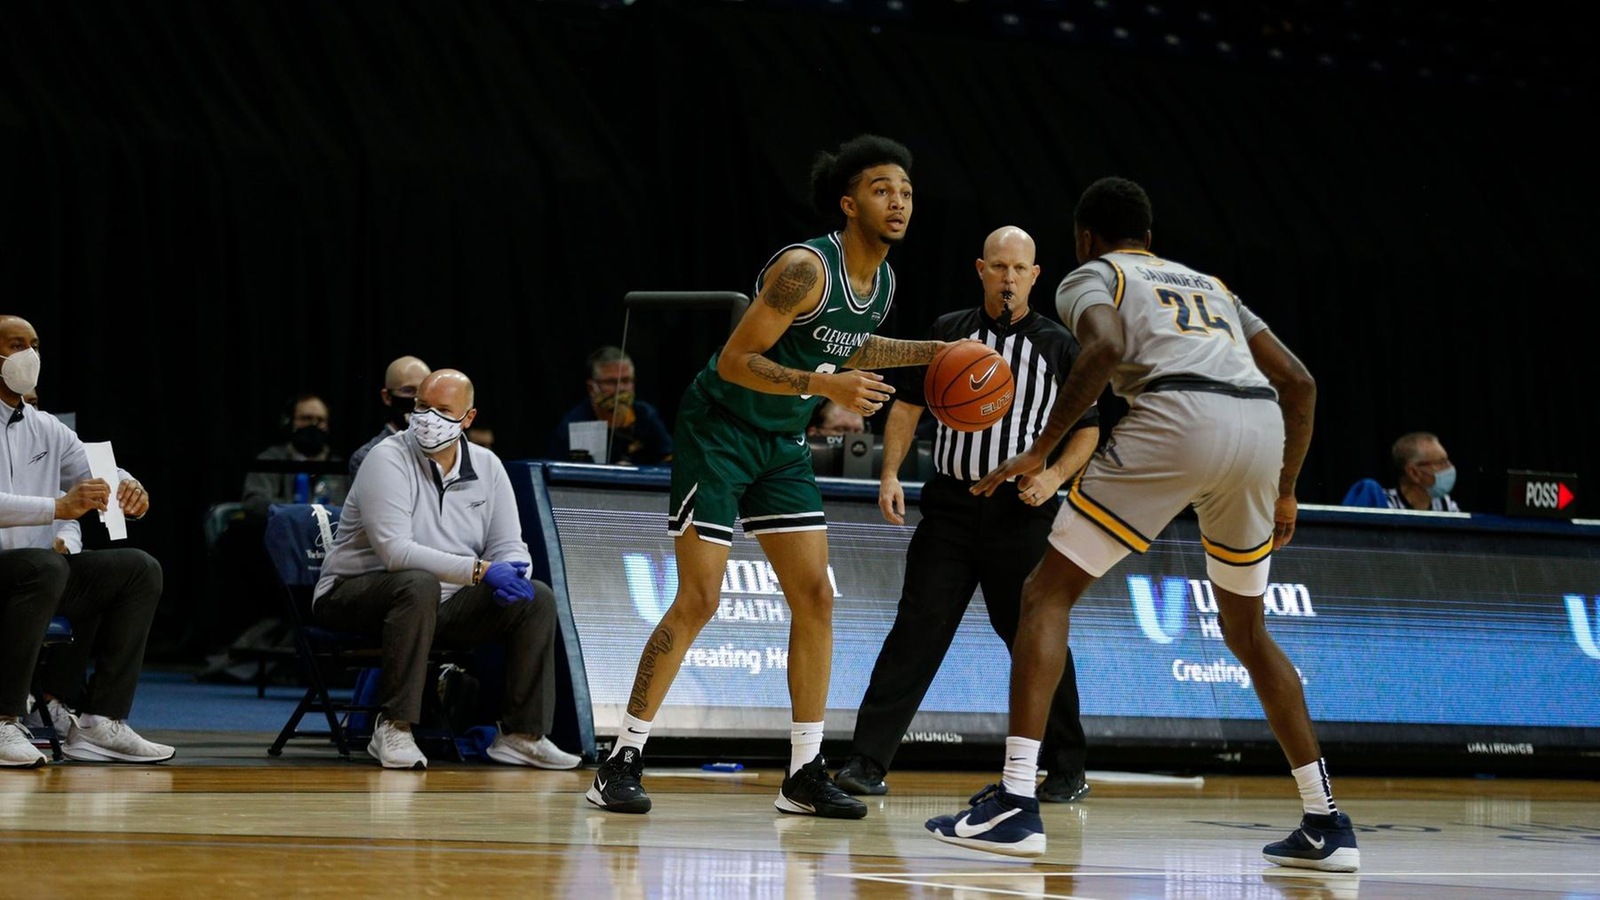 Cleveland State Falls to Toledo in Season Opener